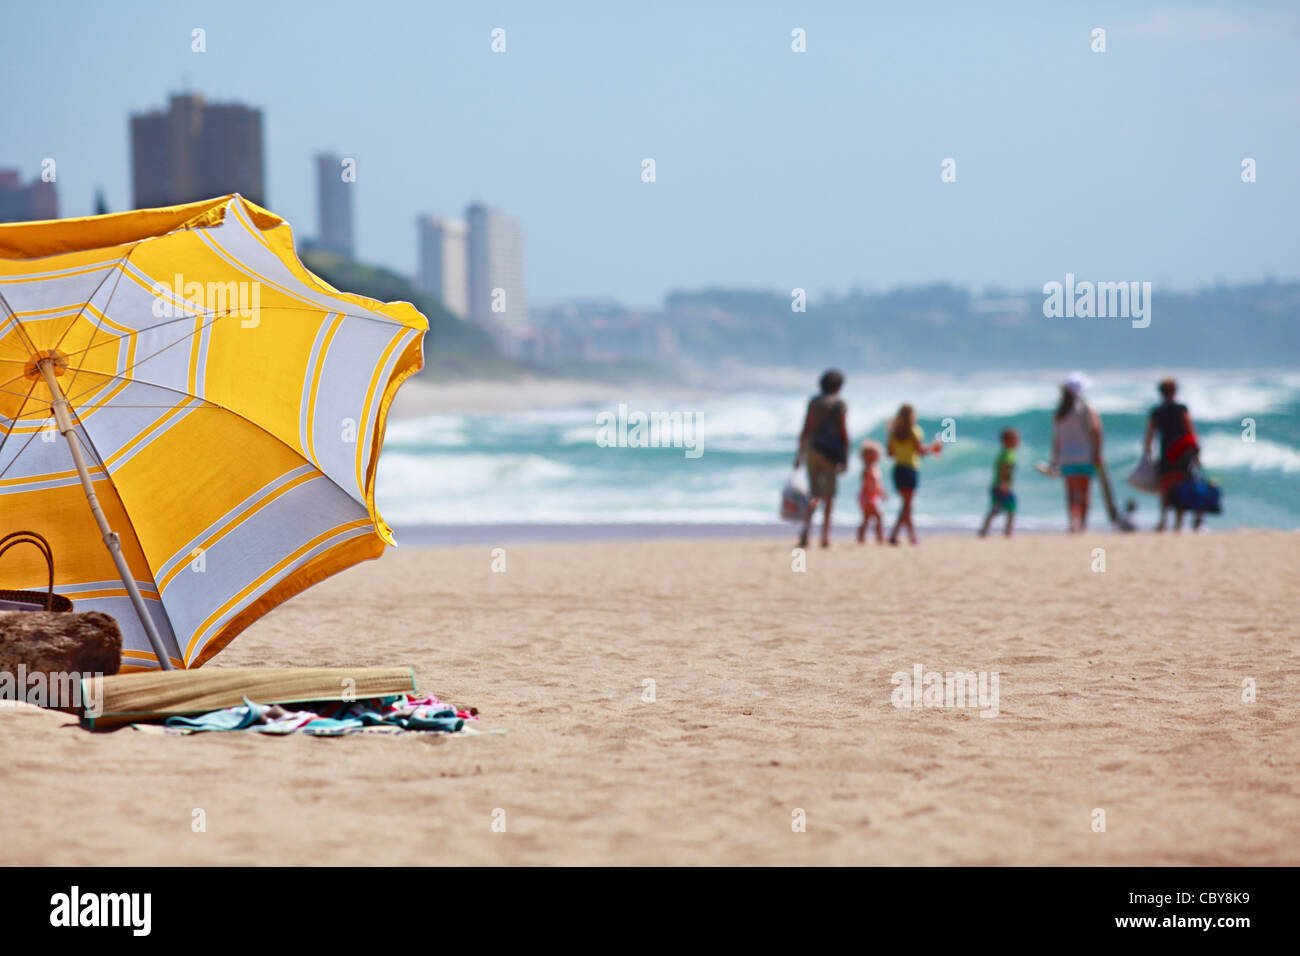 Summer beach holiday. Beach umbrella in foreground and a groupf of people in the diastance. South Coast, South Africa. Stock Photo